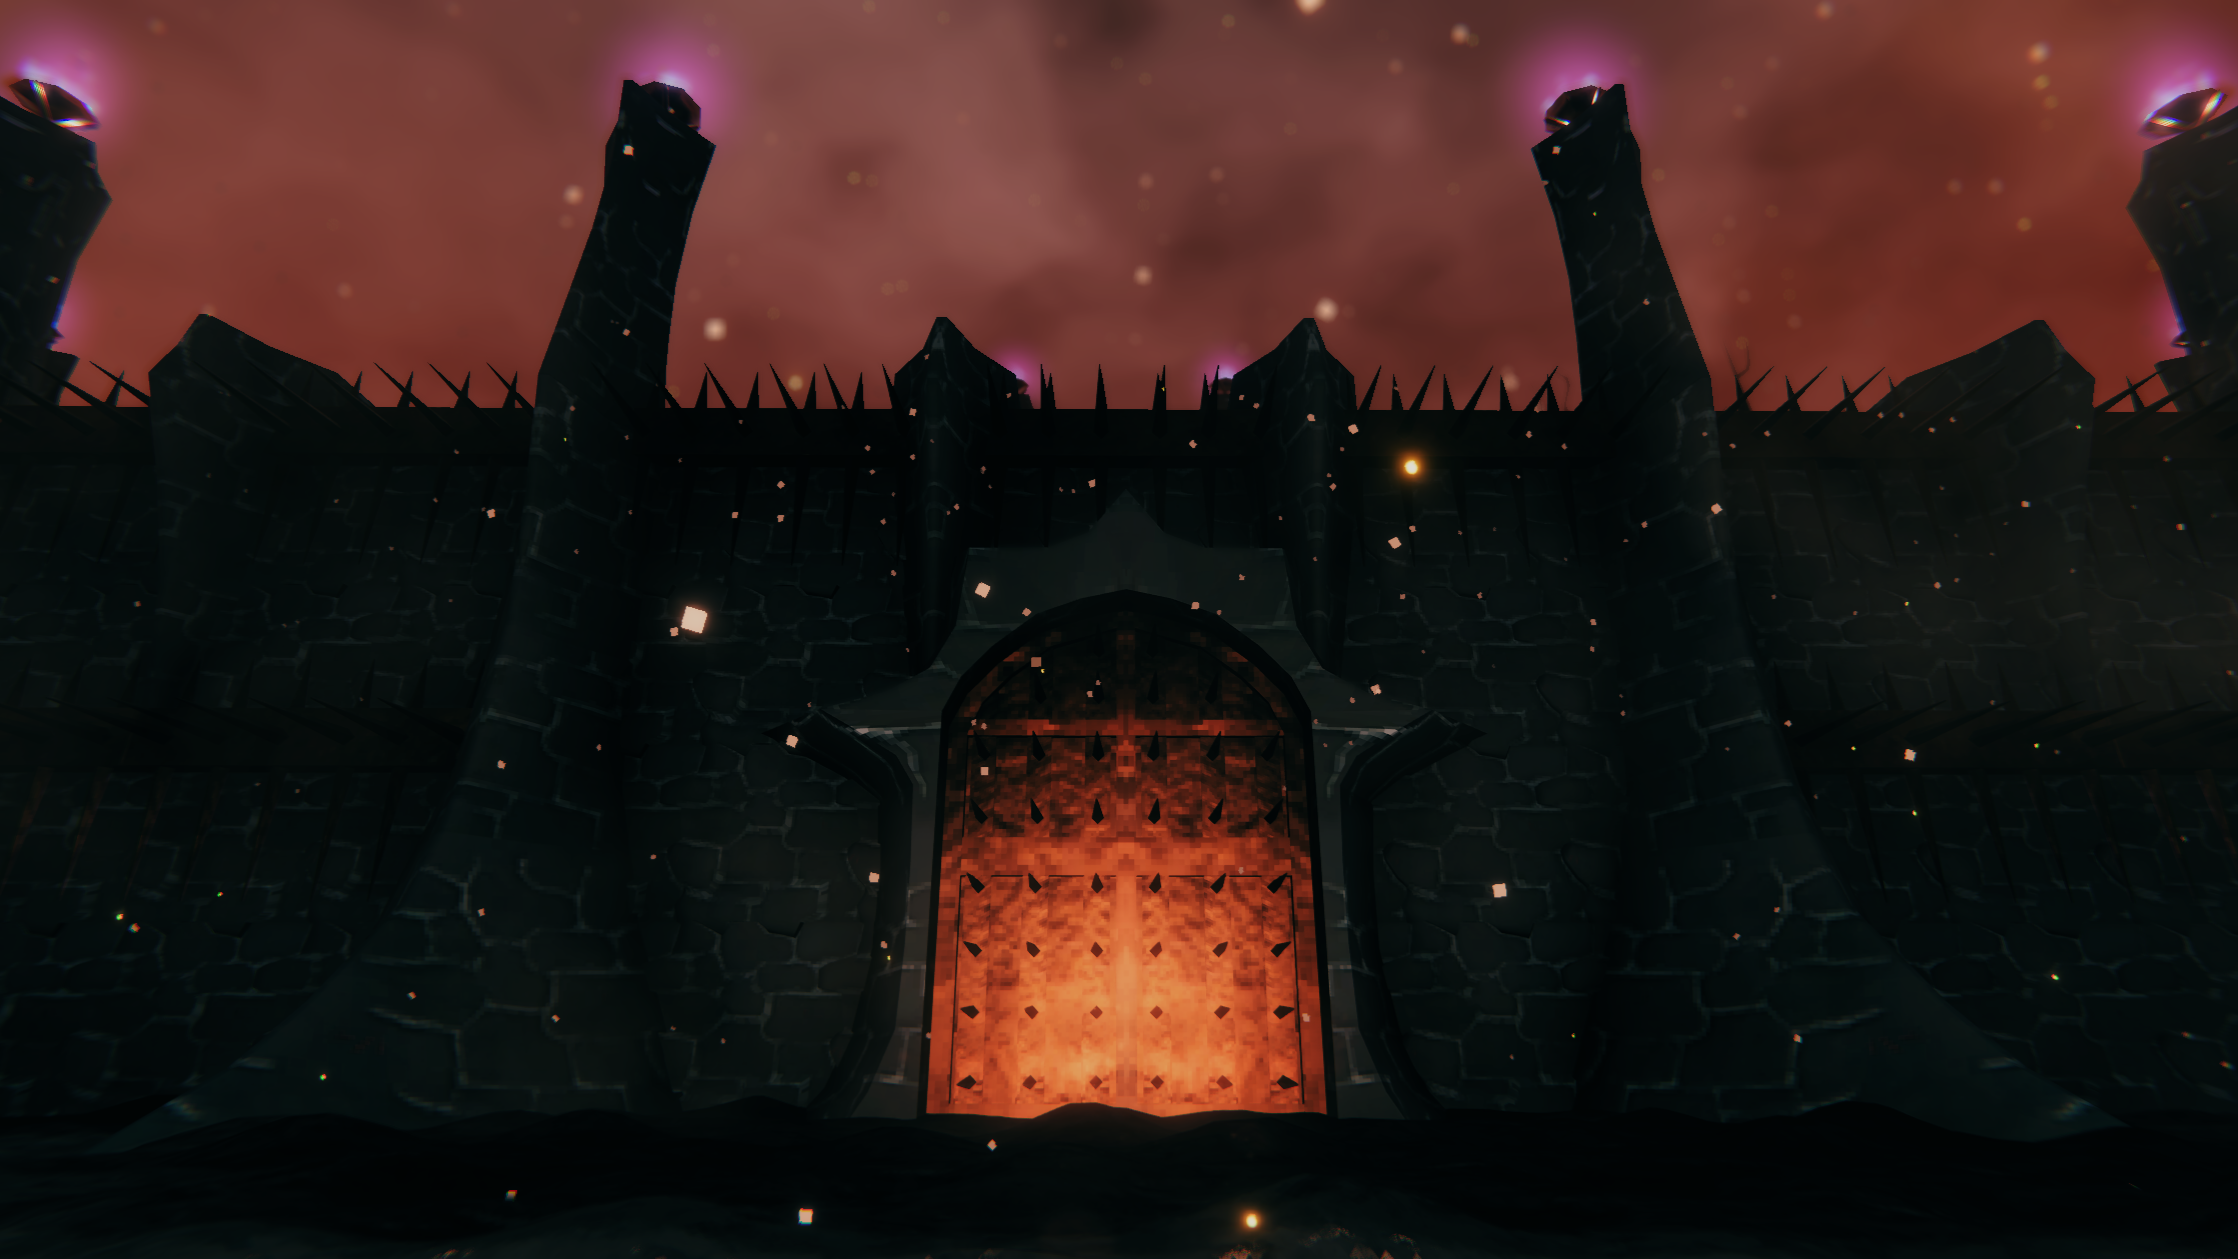 Scary-looking fortress in Valheim Ashlands with red skies, spires, and spikes on the ramparts.